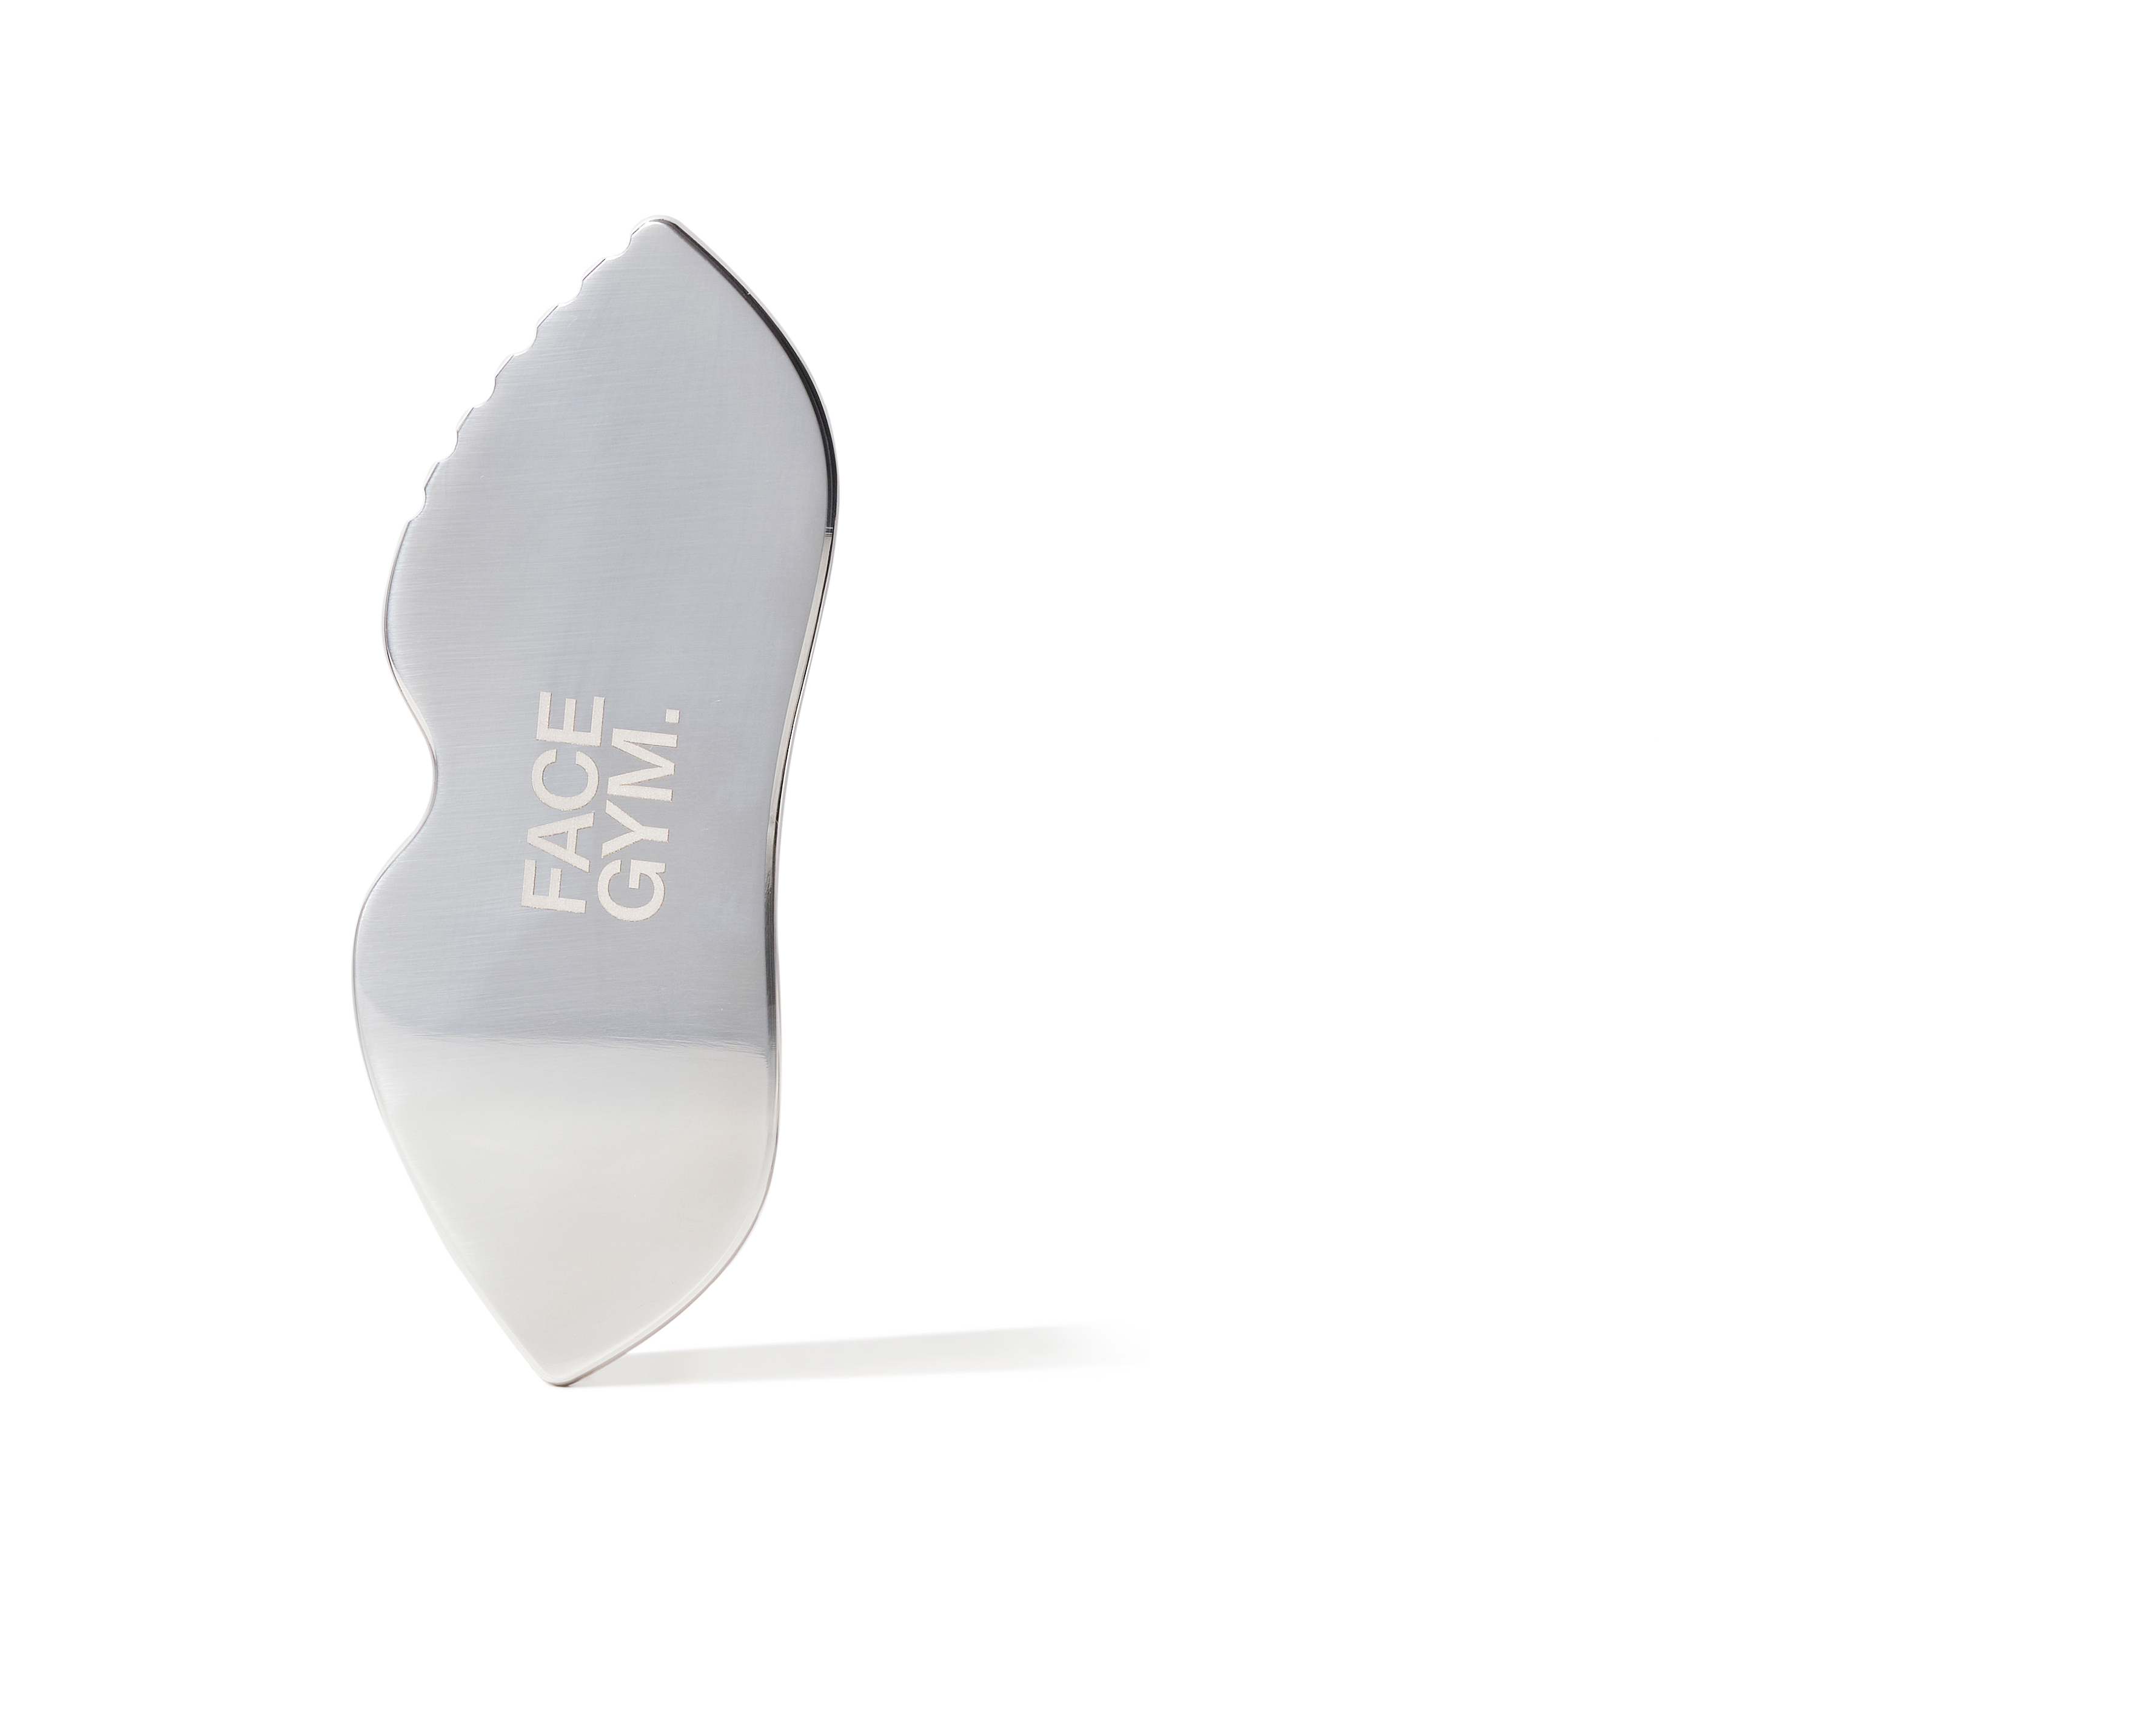 The Face Gym Multi-Sculpt High Performance Gua Sha hugs the face’s contours for effective massage and draining